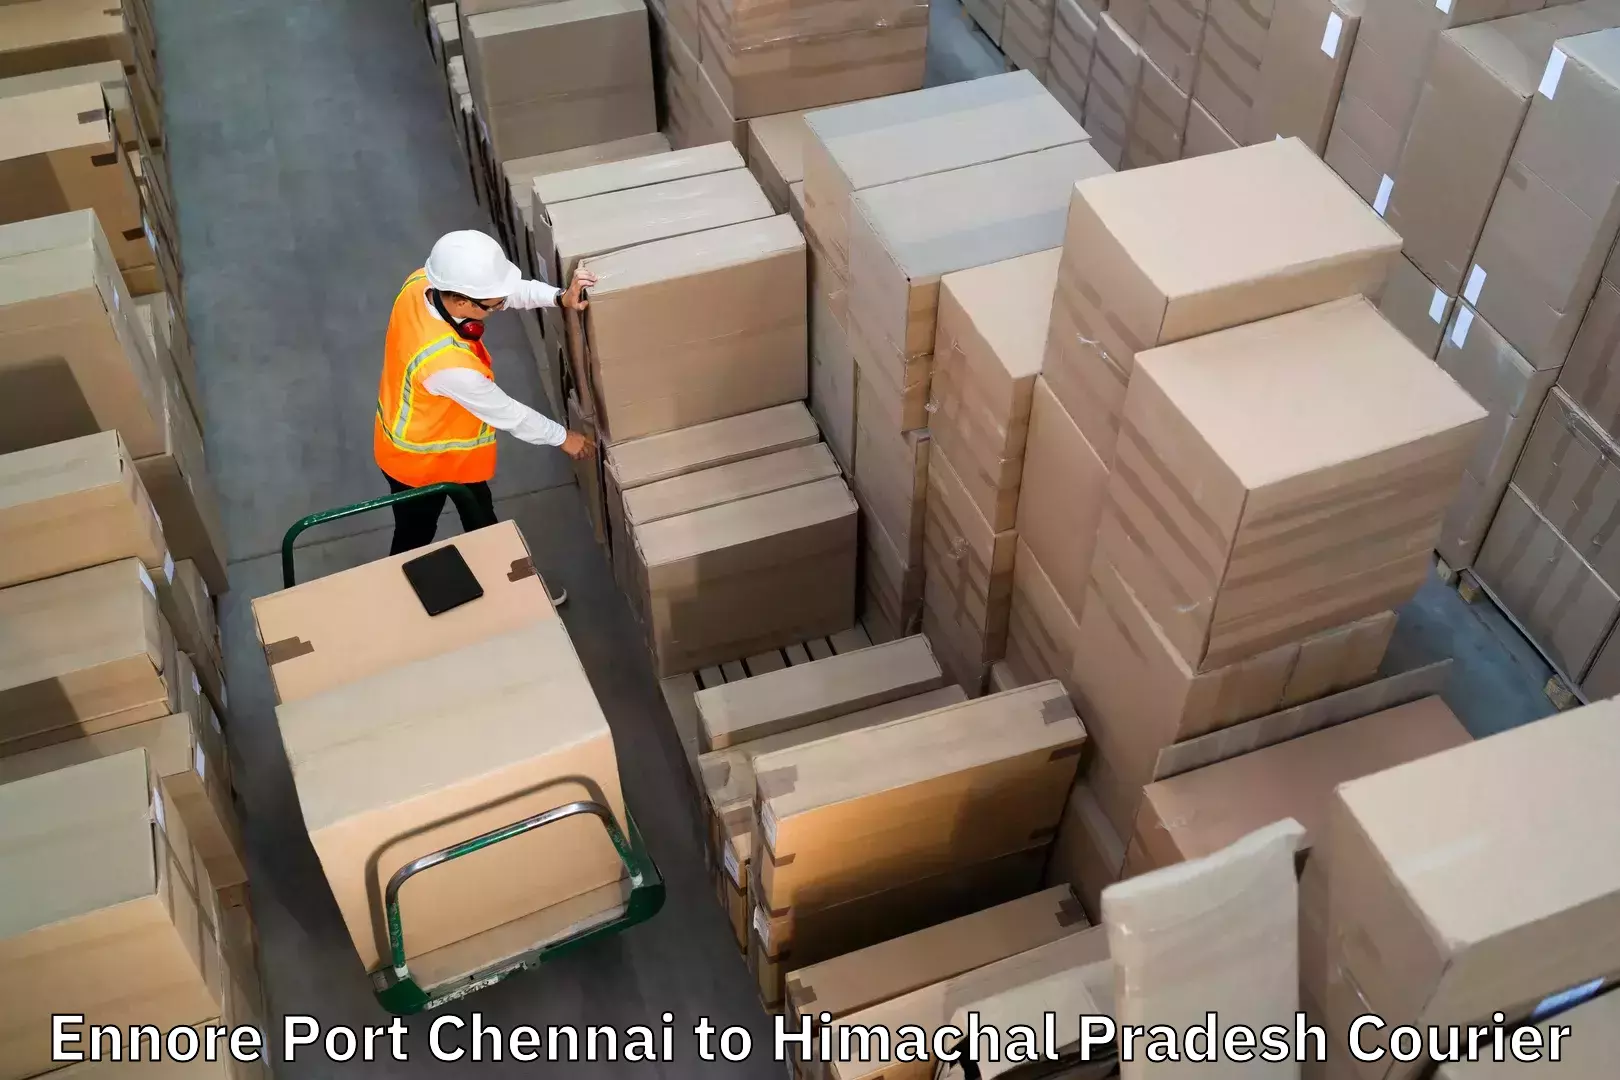 Same day luggage service in Ennore Port Chennai to YS Parmar University of Horticulture and Forestry Solan